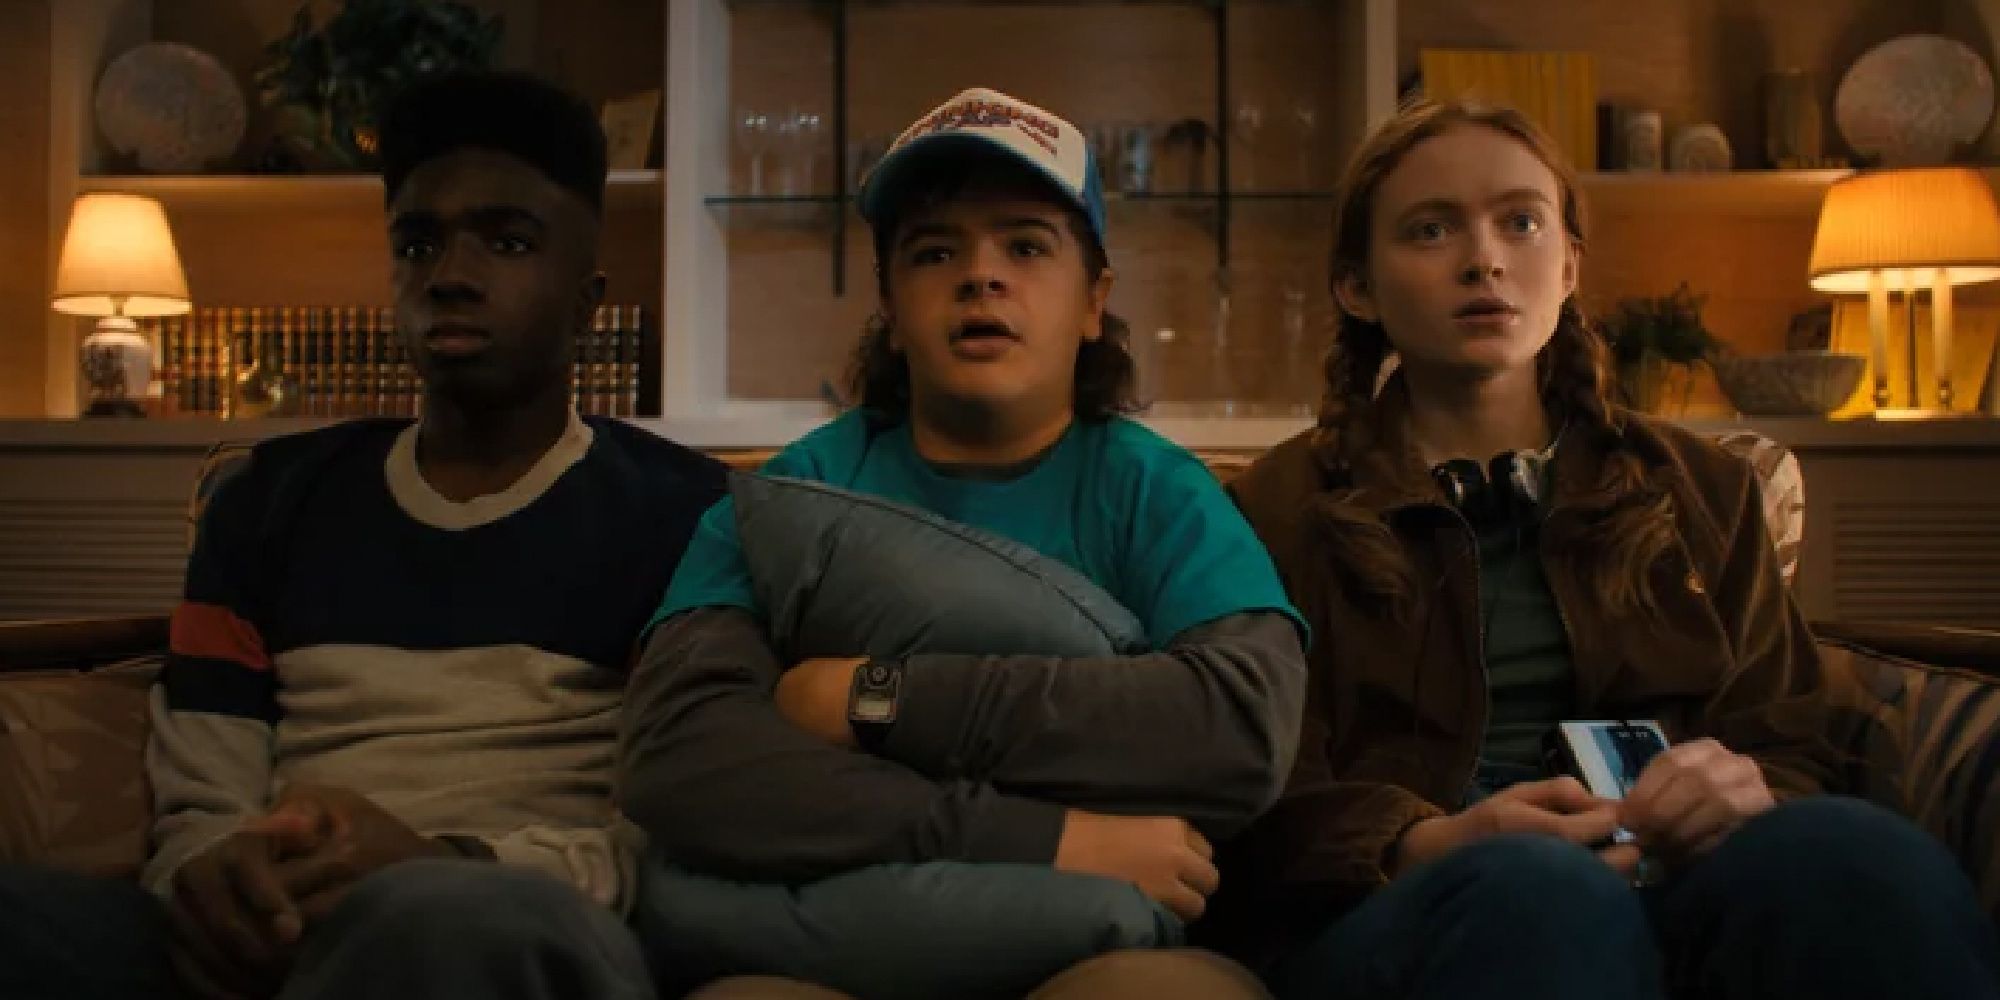 Lucas Dustin and Max on the couch on Stranger Things